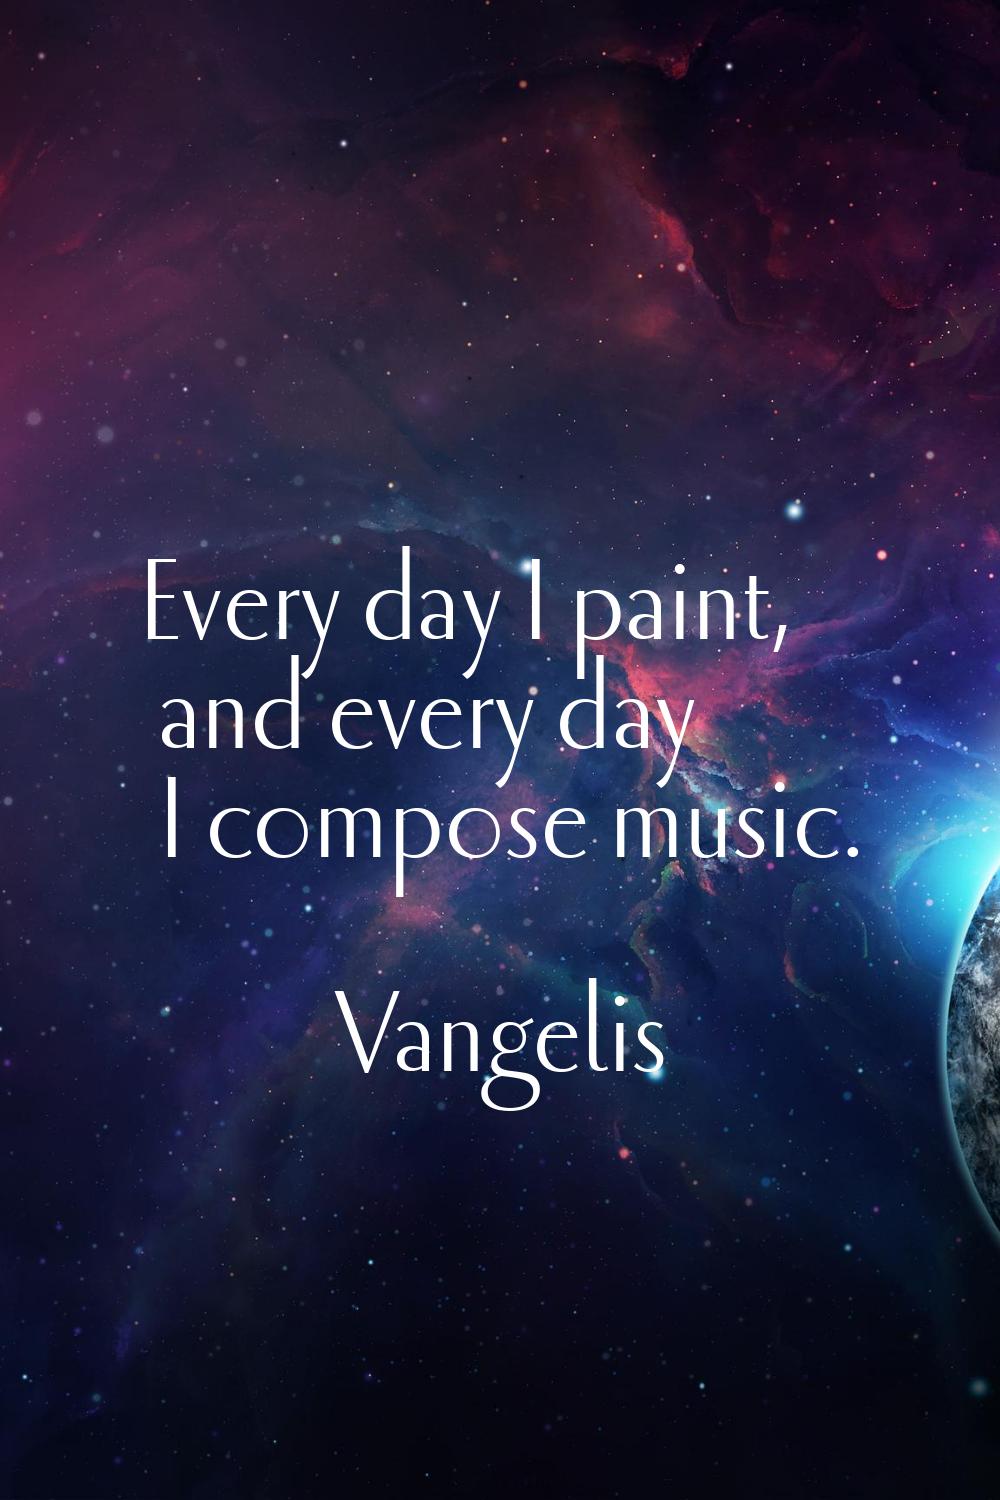 Every day I paint, and every day I compose music.